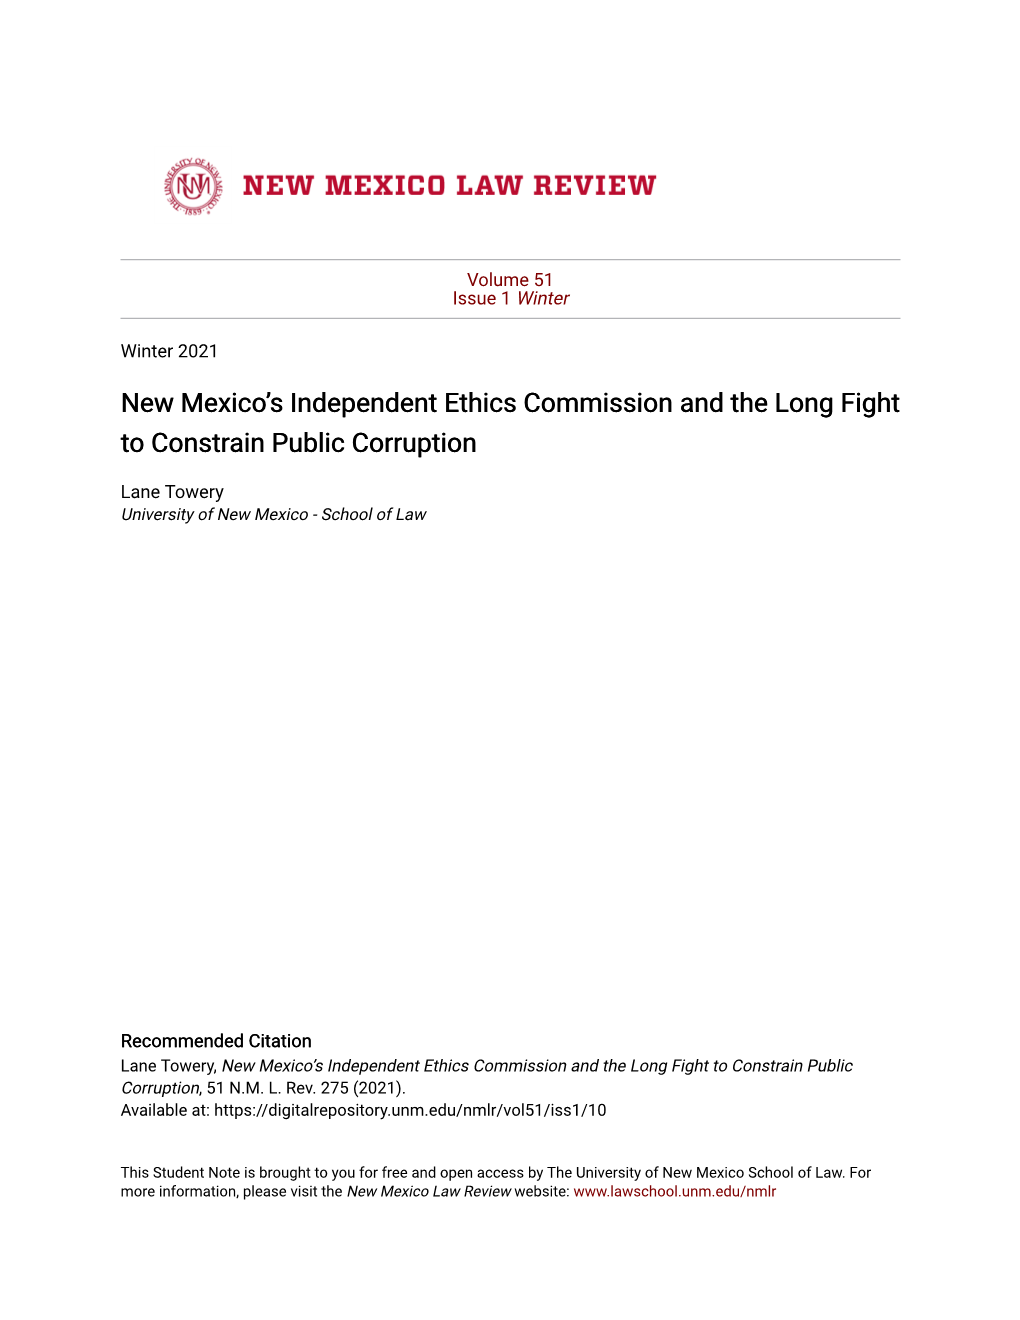 New Mexico's Independent Ethics Commission and the Long Fight To